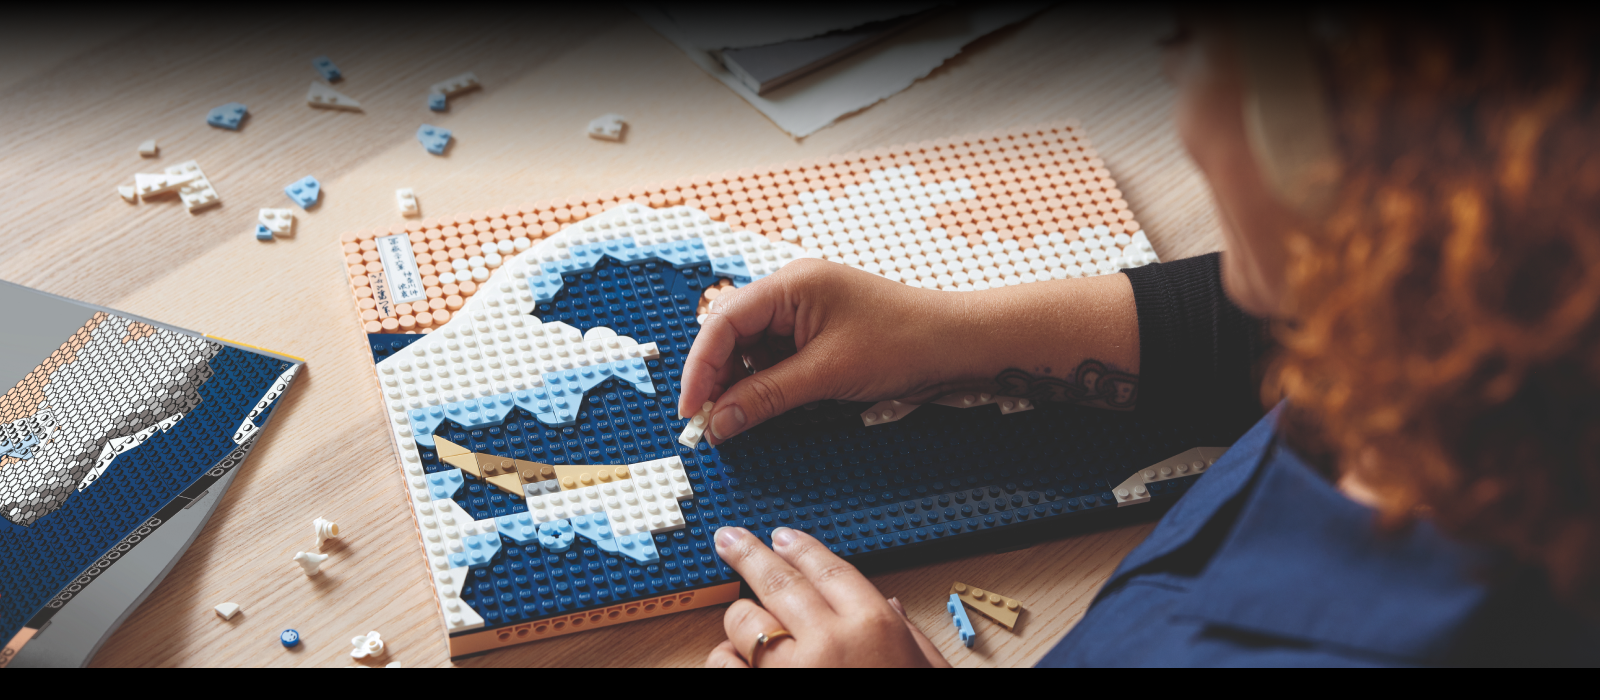 You can now recreate Hokusai's iconic 'Great Wave' with Lego